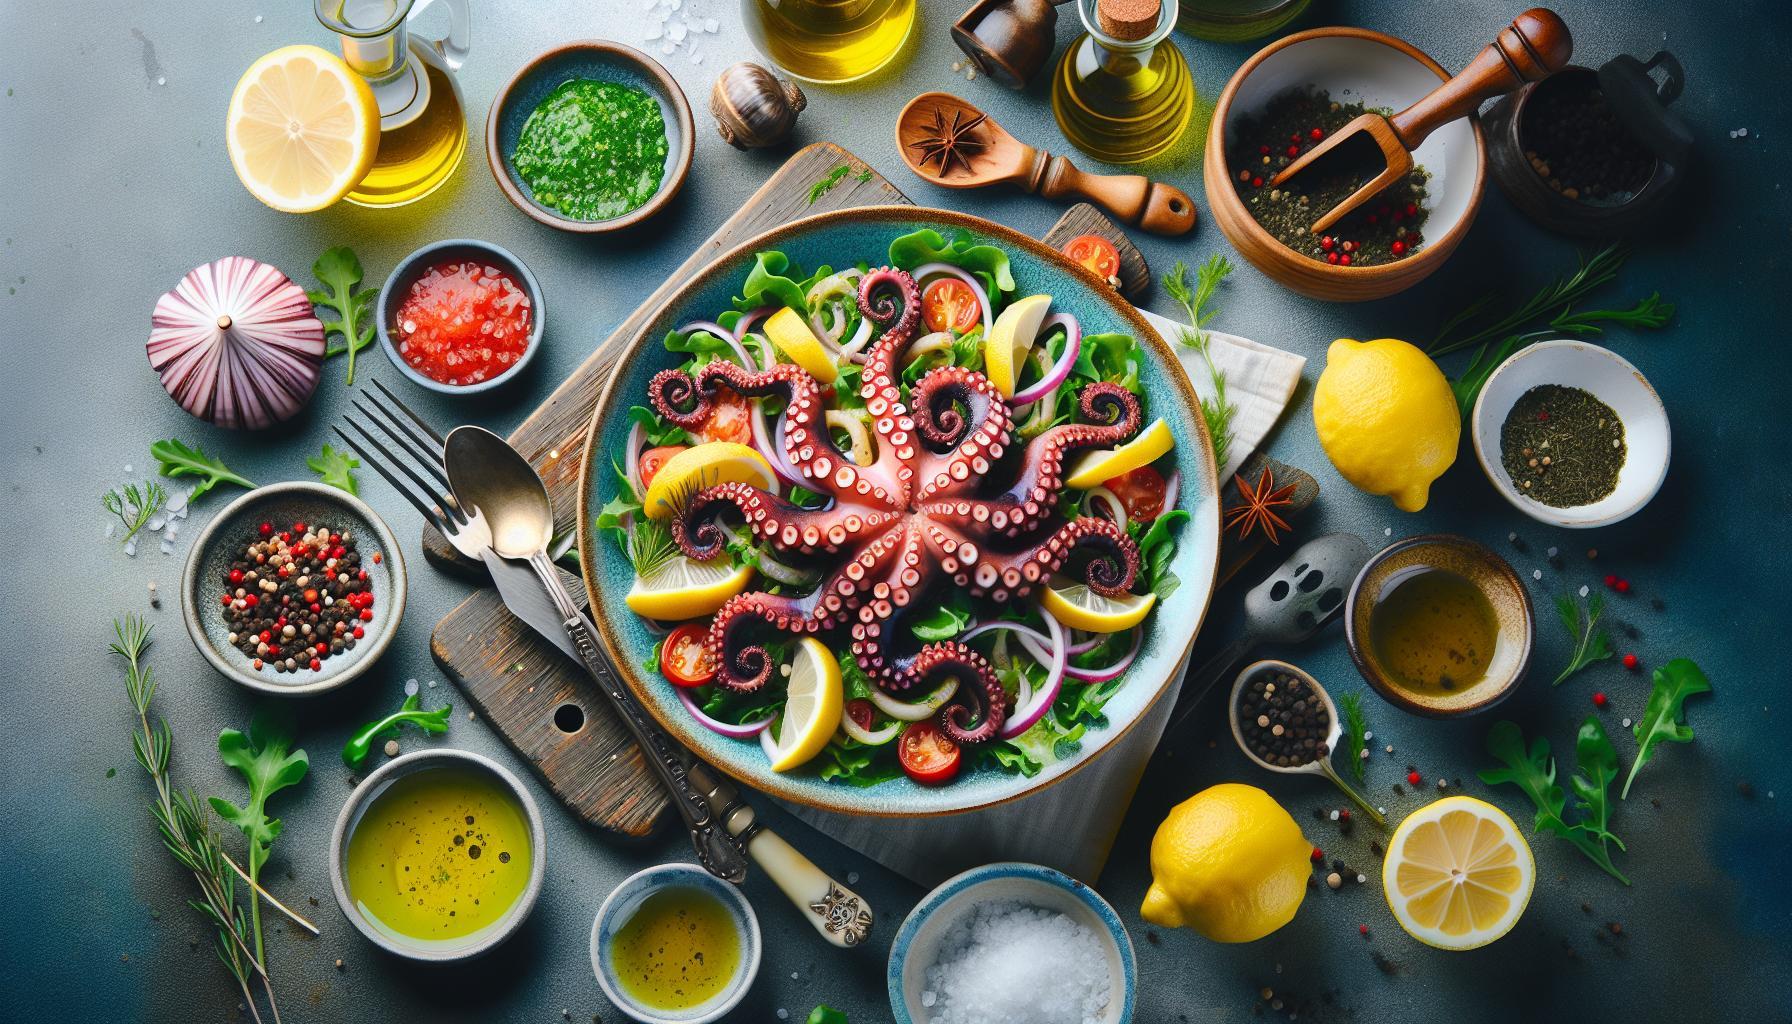 Fresh and Tangy Octopus Salad with Lemon Dressing – A Seafood Delight!